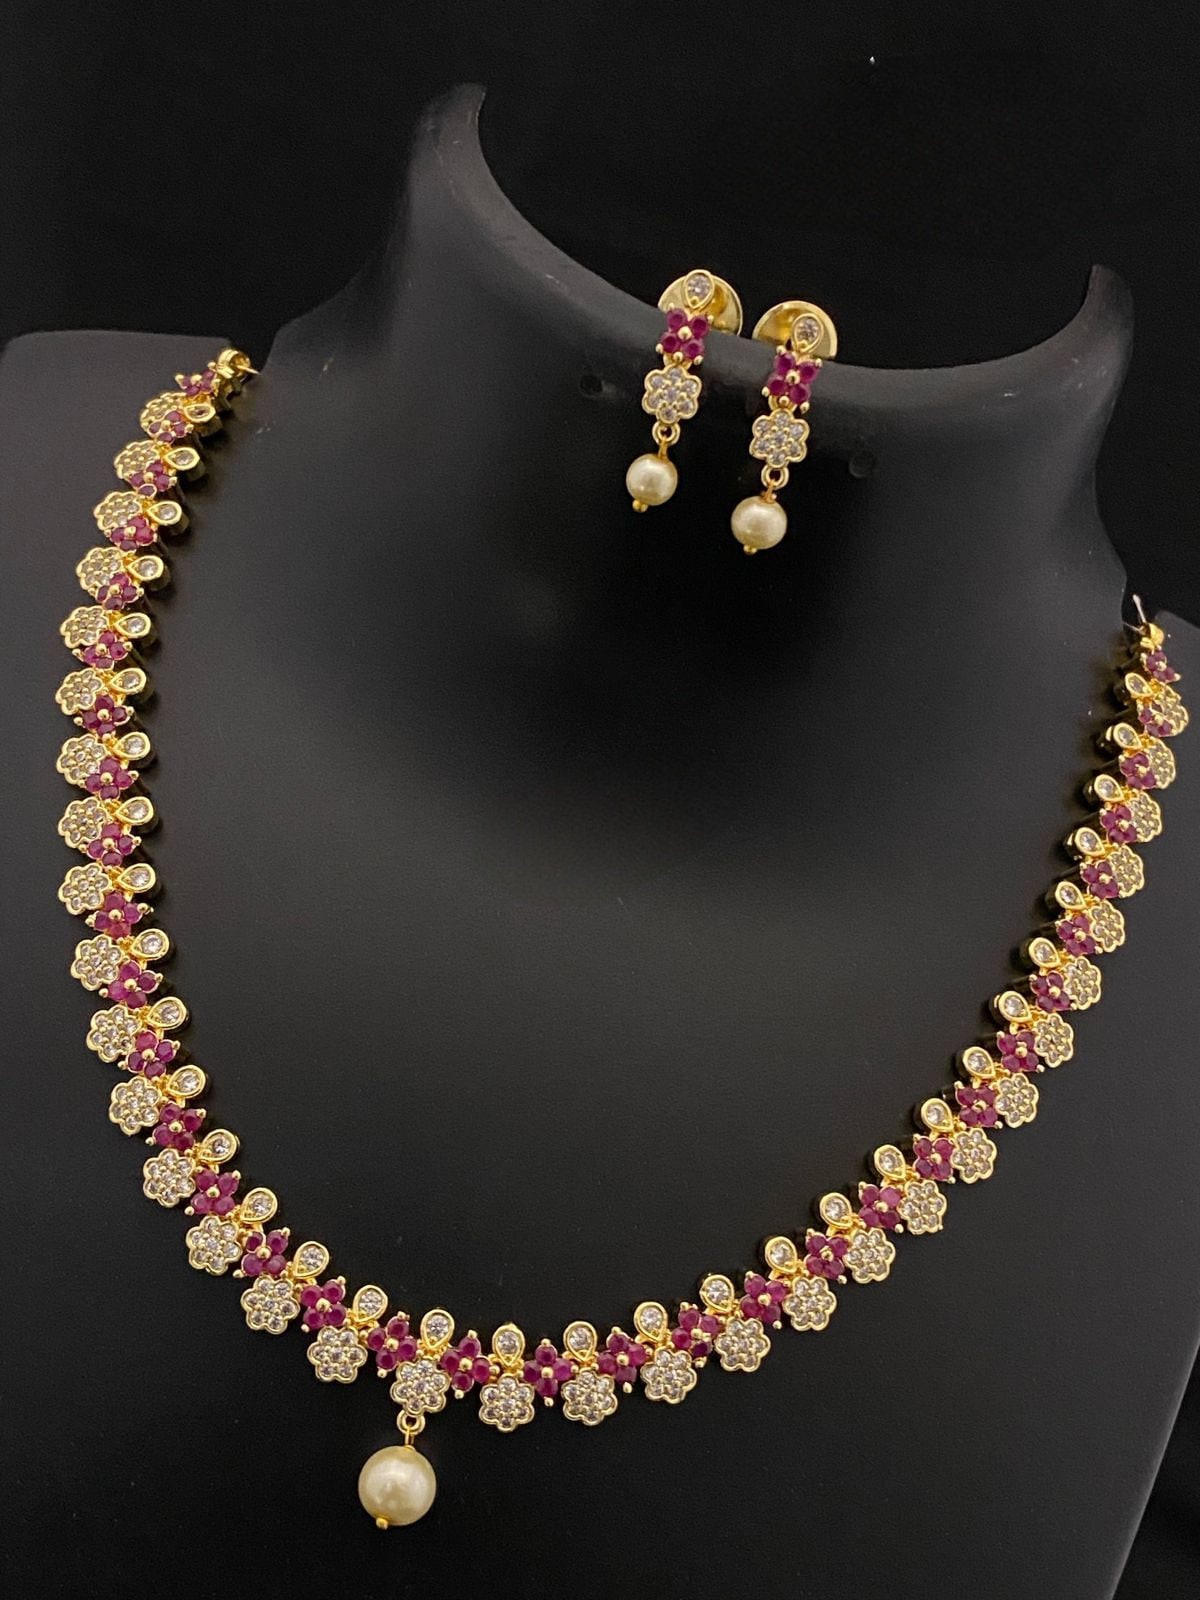 Gold Plated CZ crystal American diamond Floral choker Necklace Earring Set |Small AD choker set | Multicolor fashion Jewelry set for women